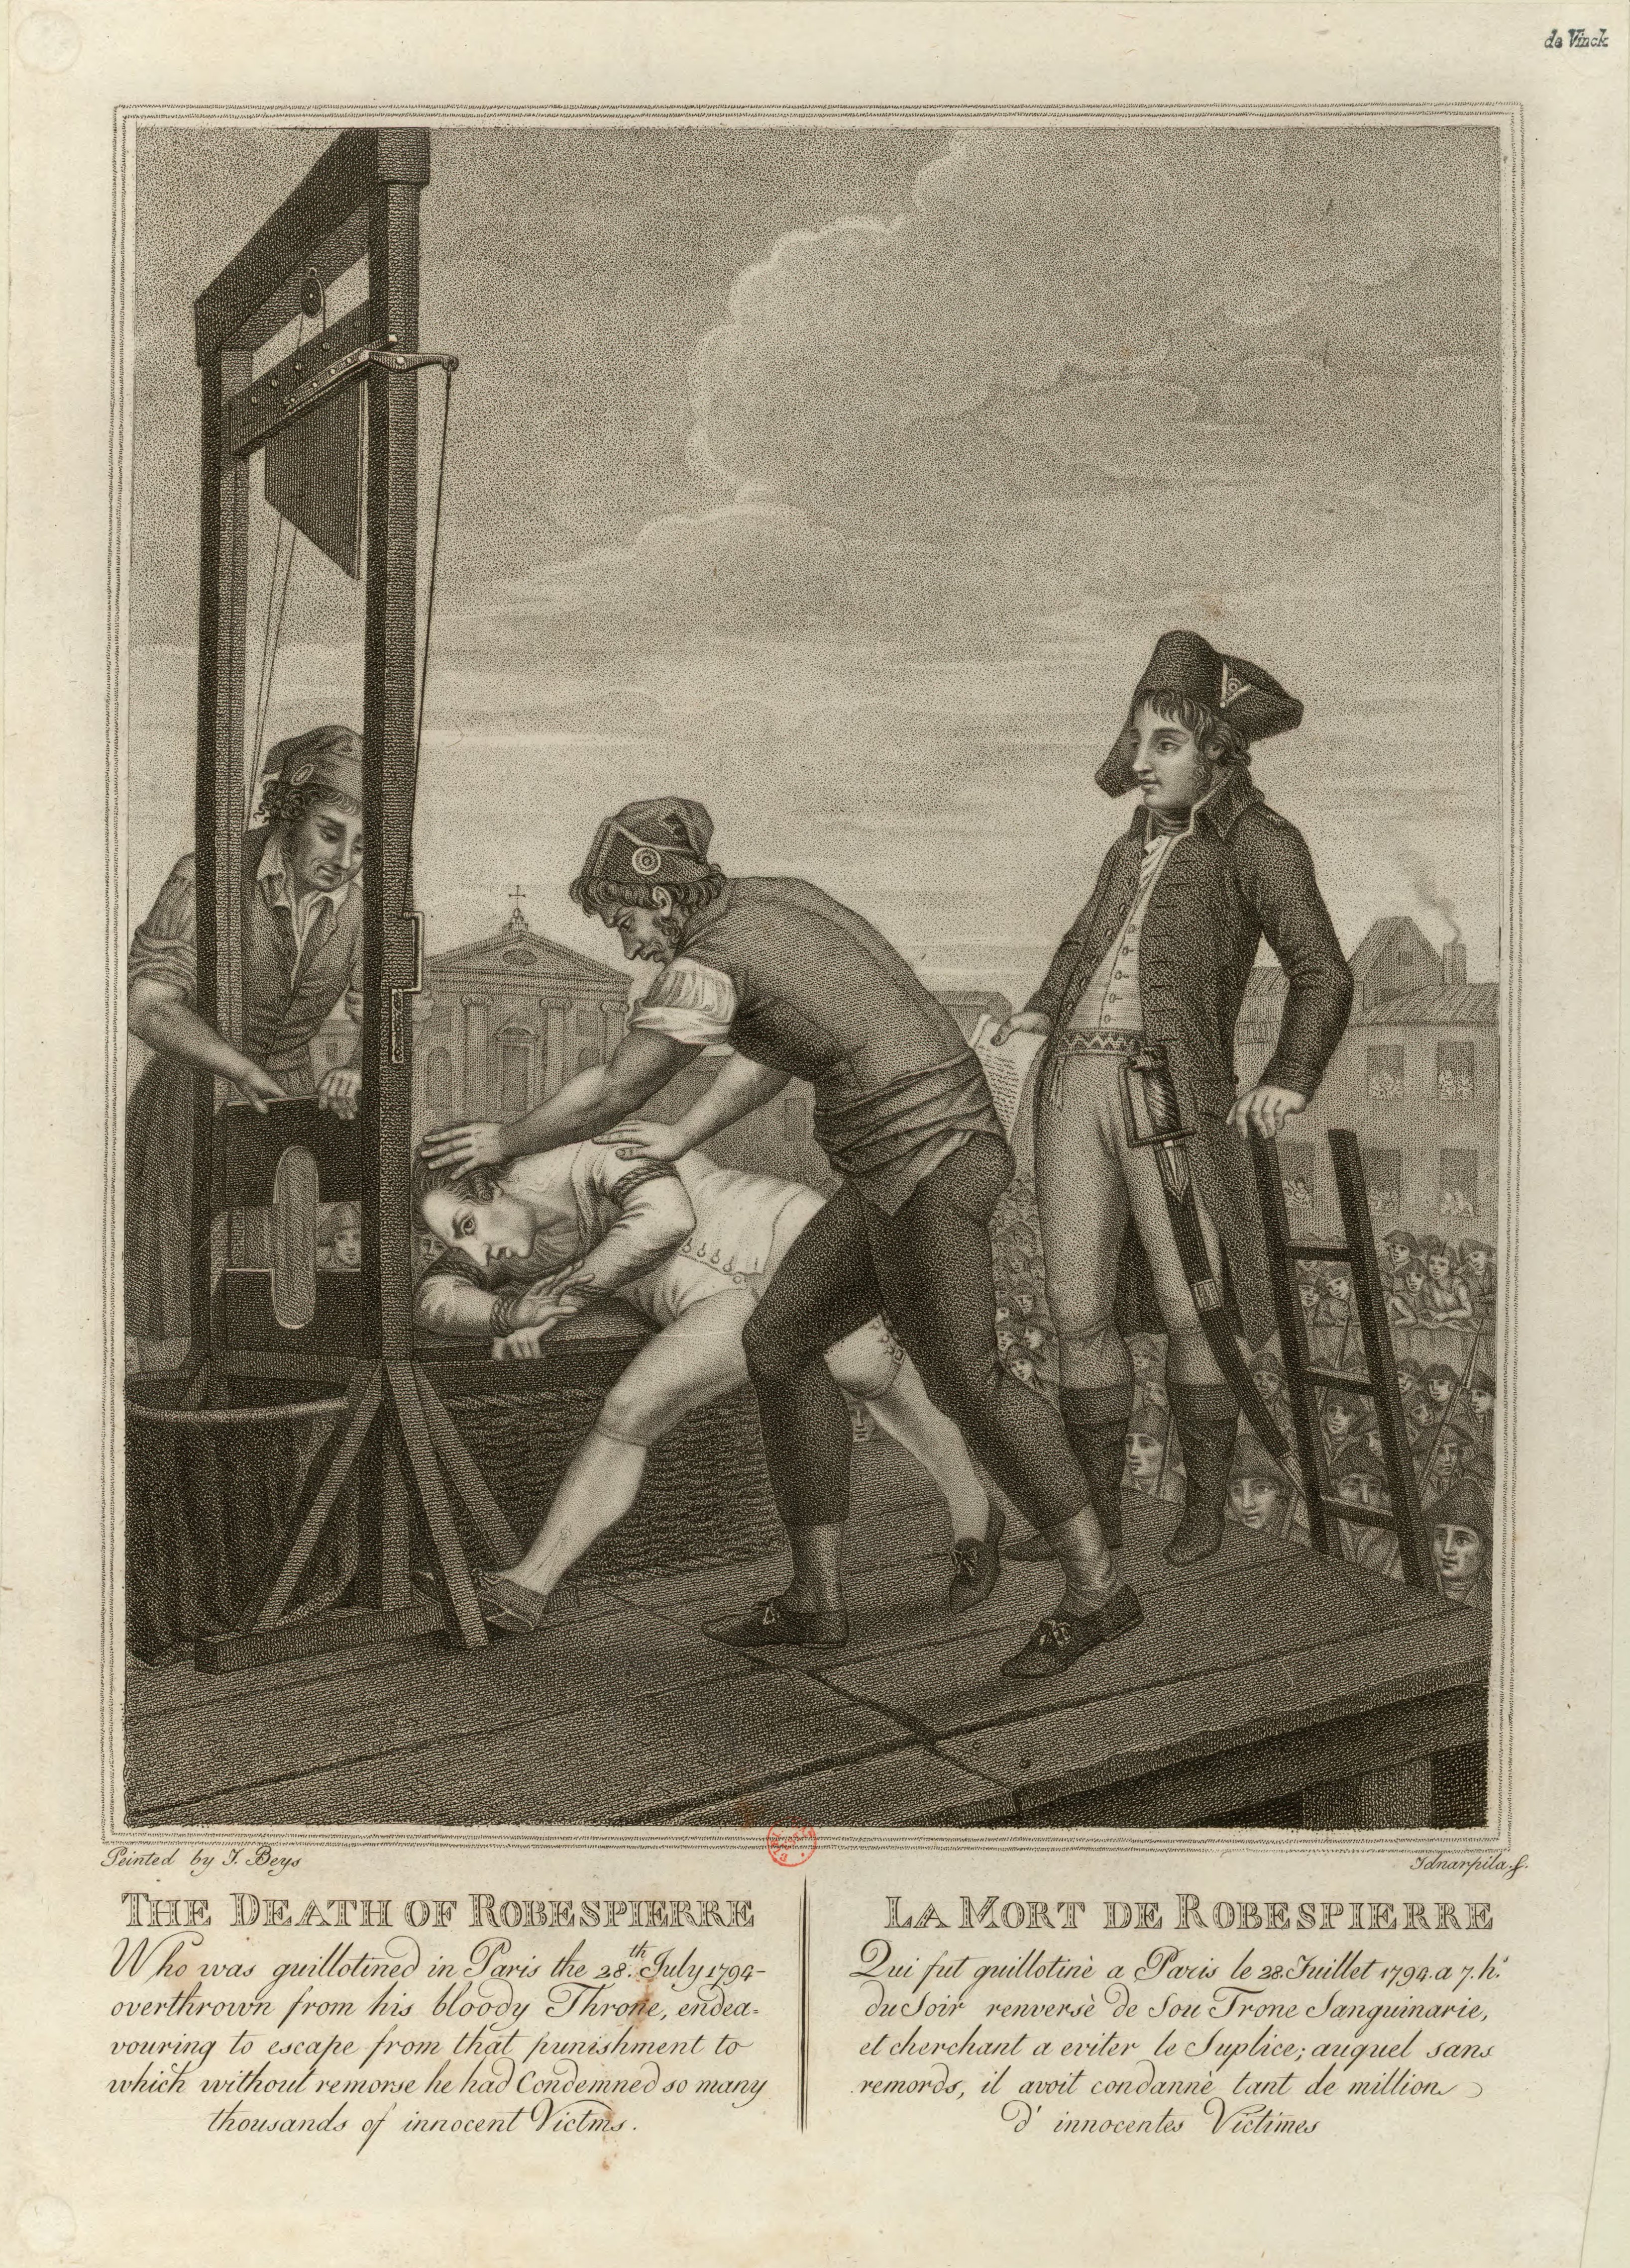 Engraving depiction of the death of Robespierre